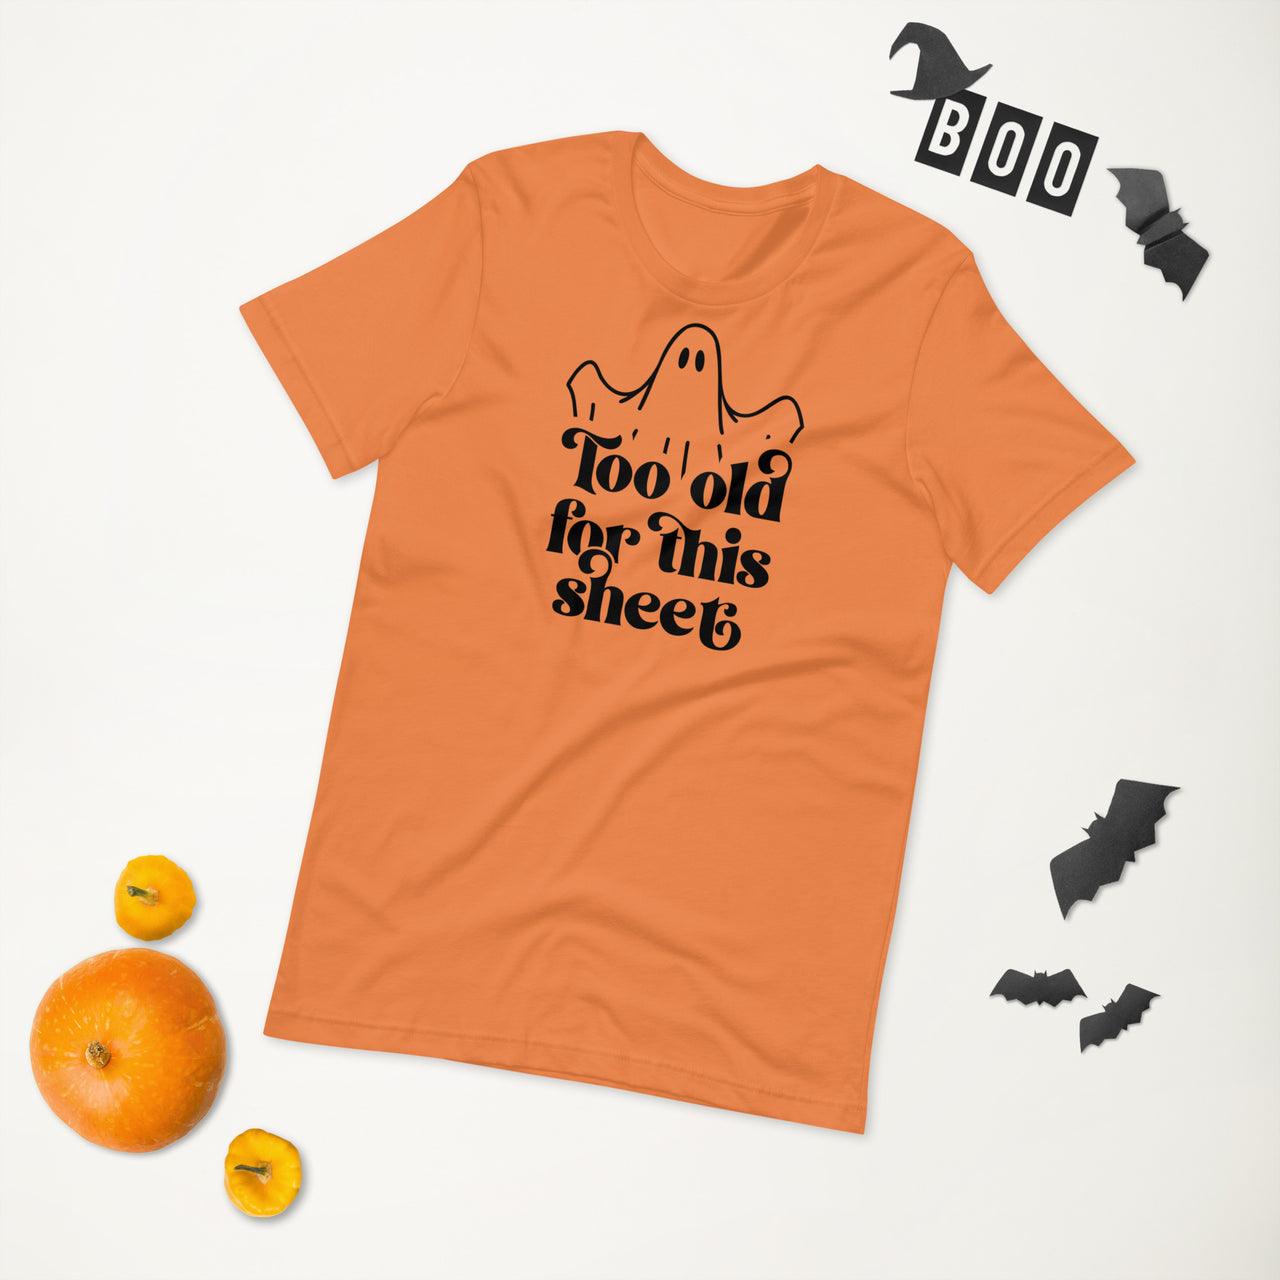 Too Old For This Sheet Ghost T-shirt